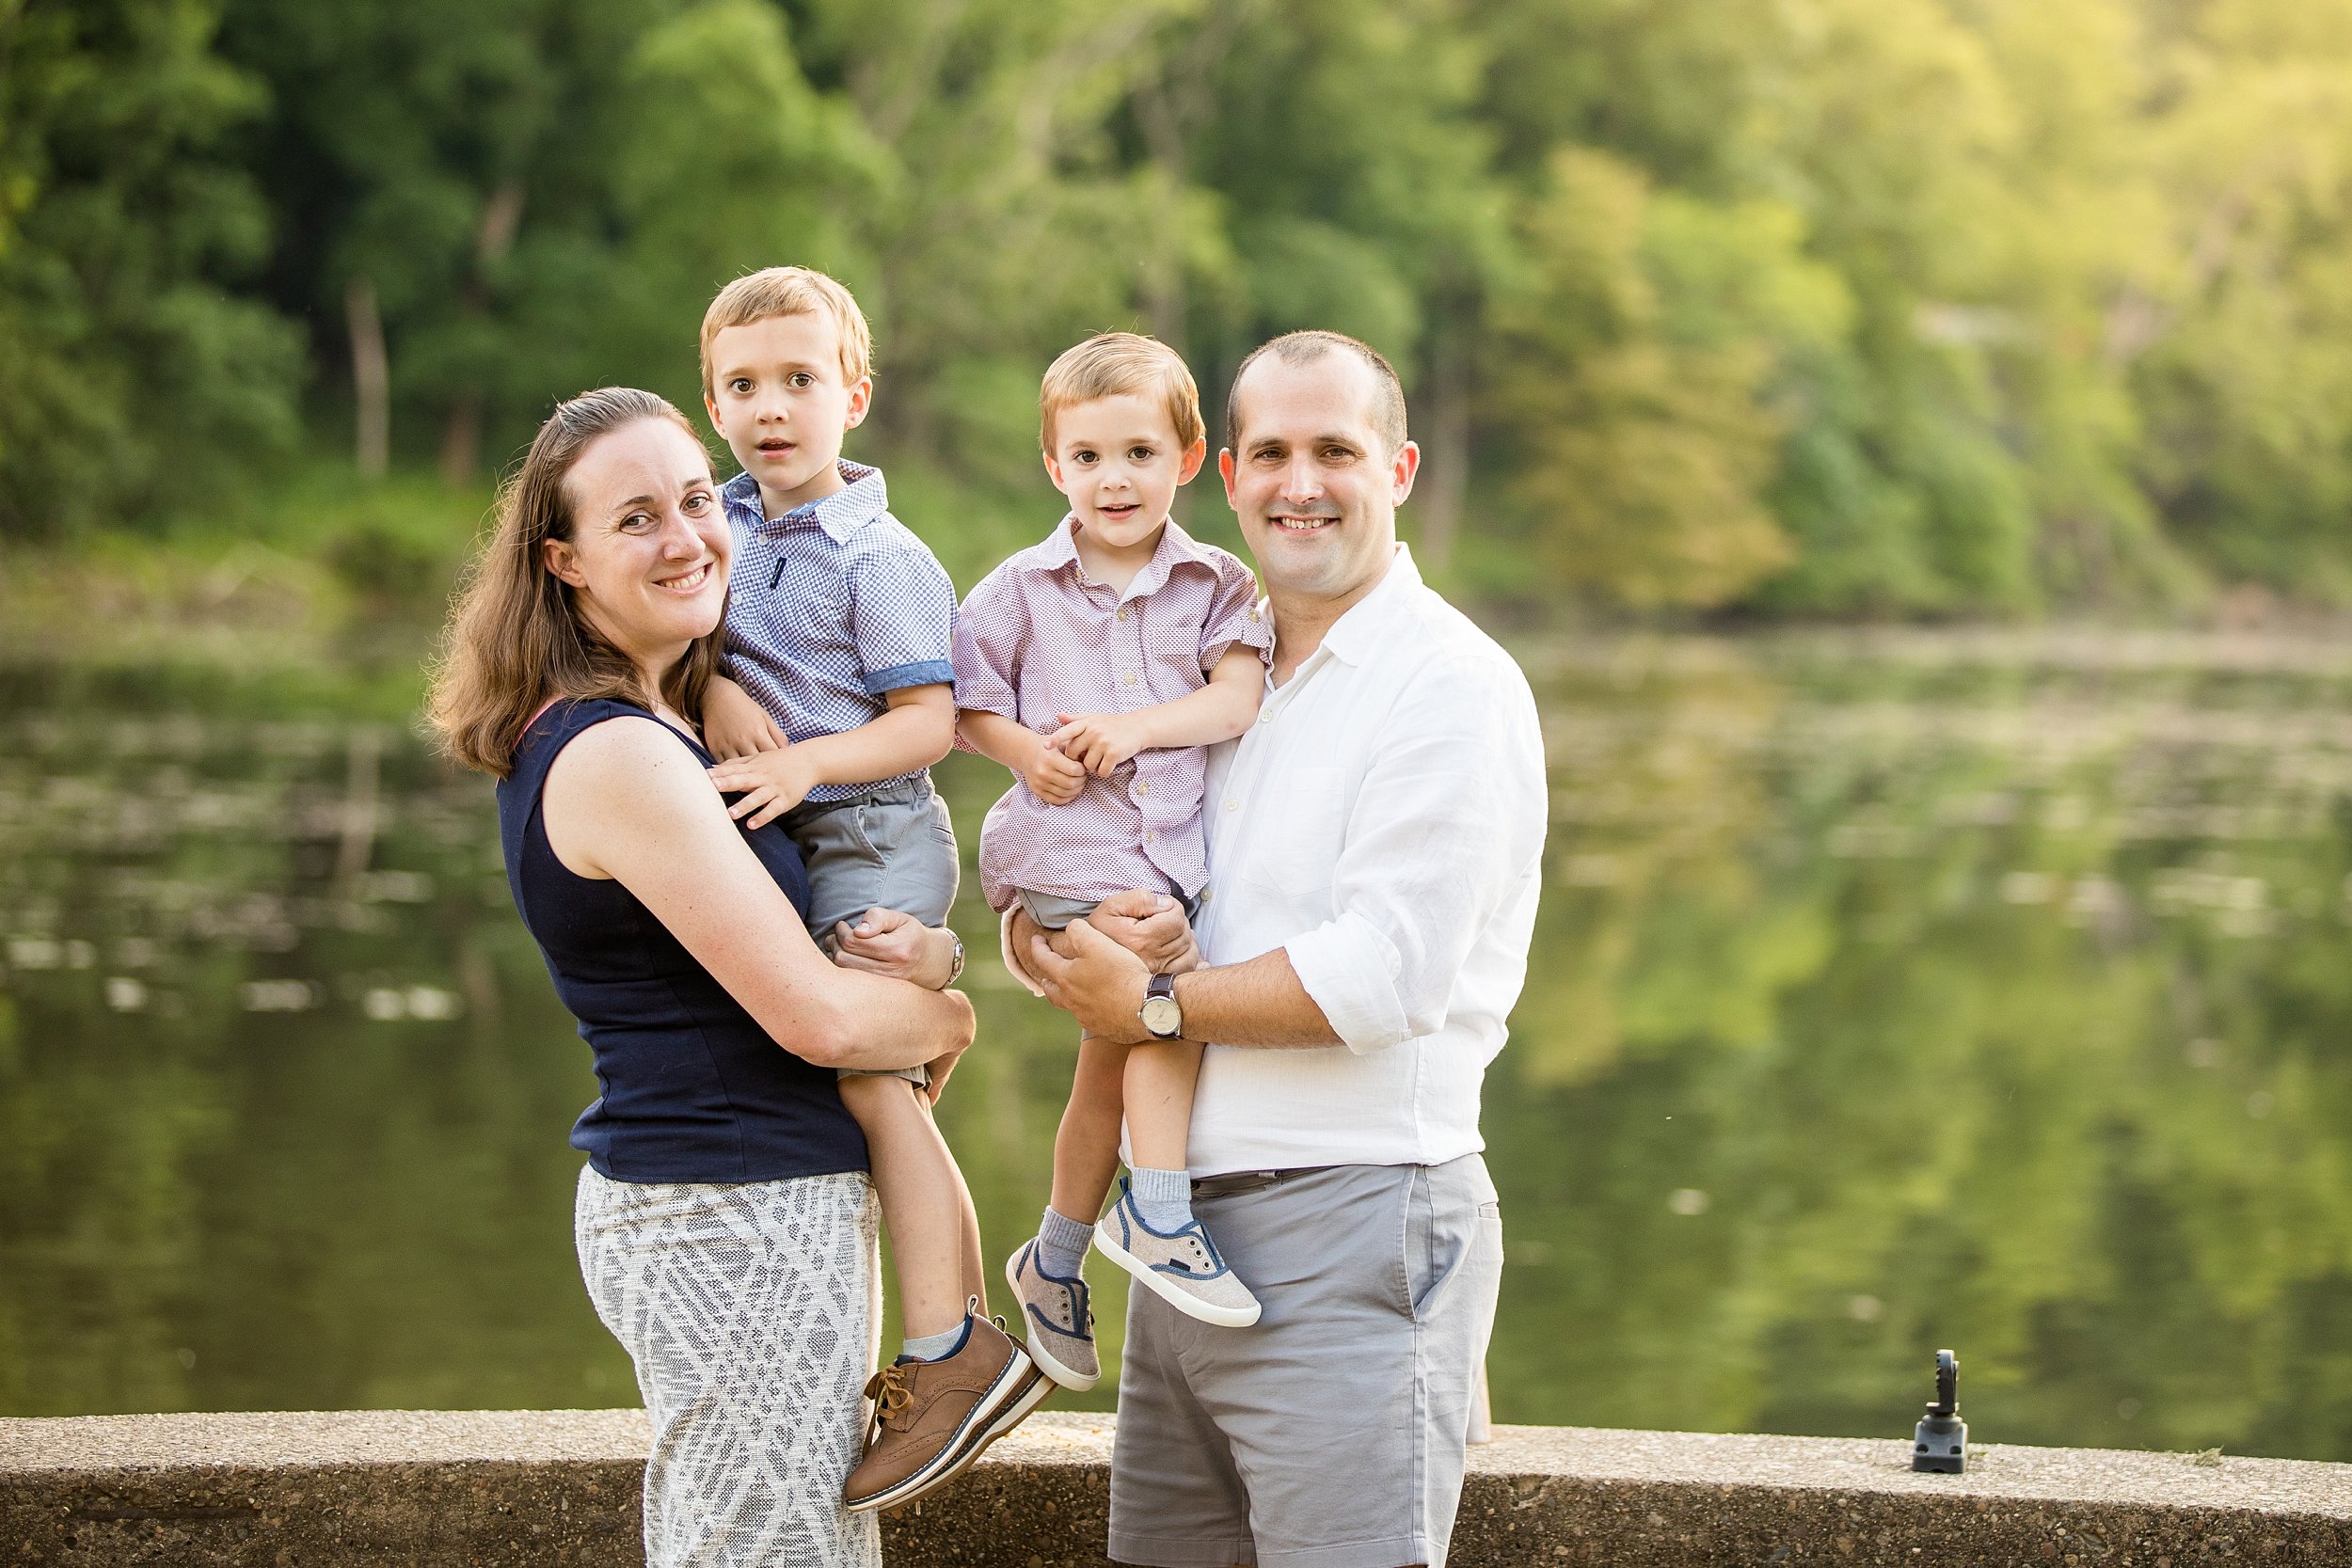 north park family photos, pittsburgh family photographer, cranberry township family photographer, zelienople family photographer, wexford family photographer